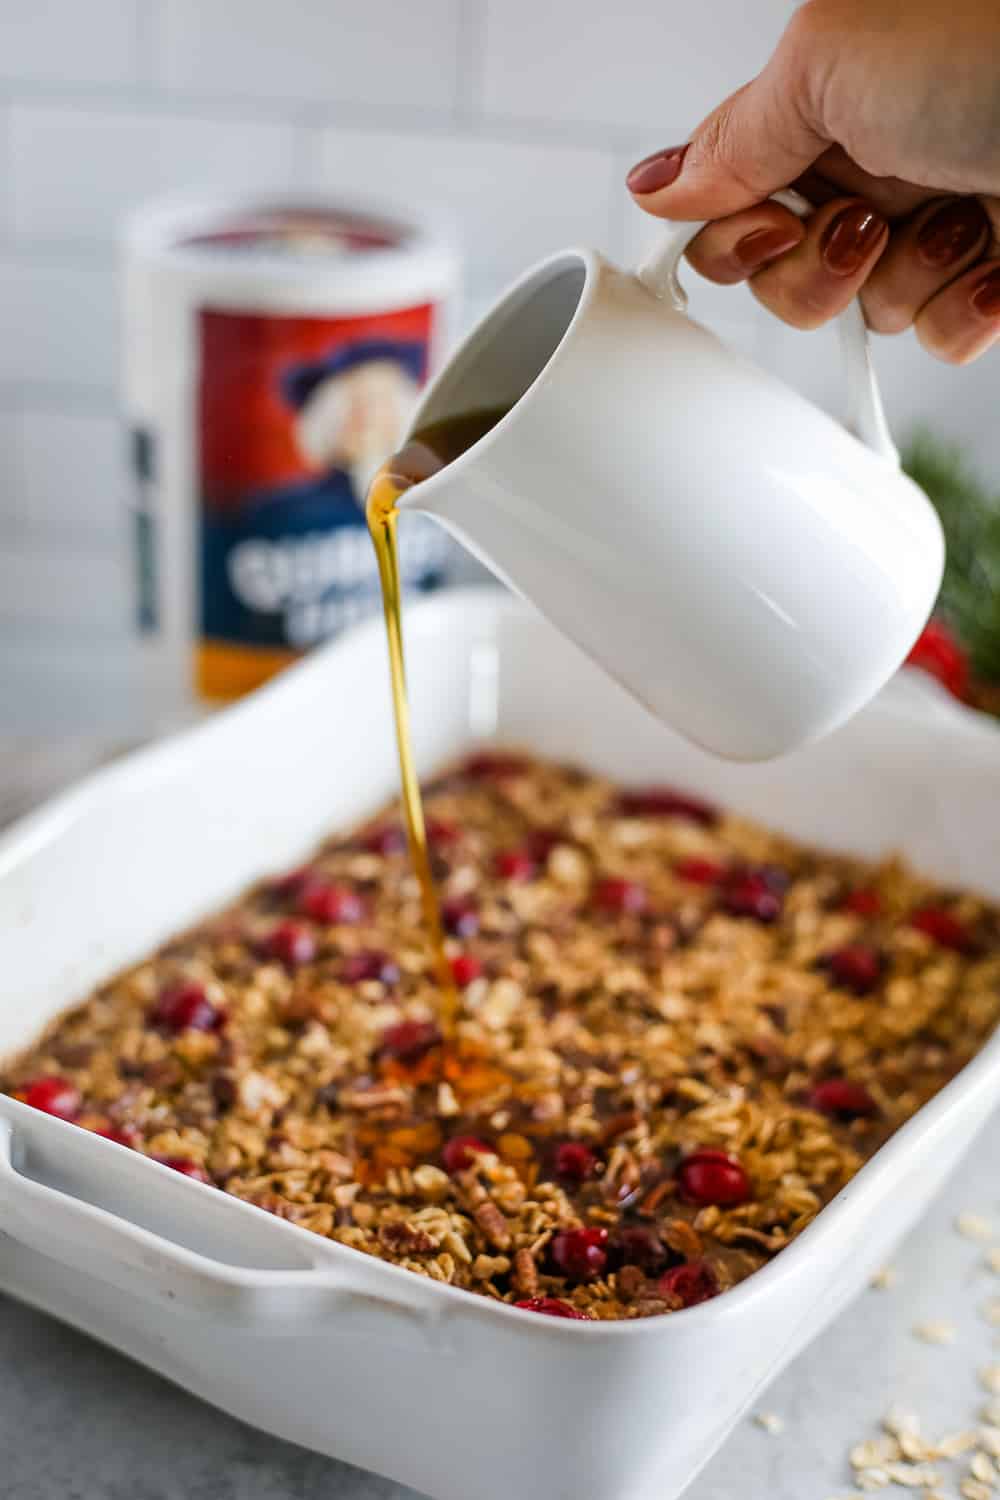 A woman's hand pours maple syrup over a baked oatmeal recipe with a canister of Quaker Oats in the background